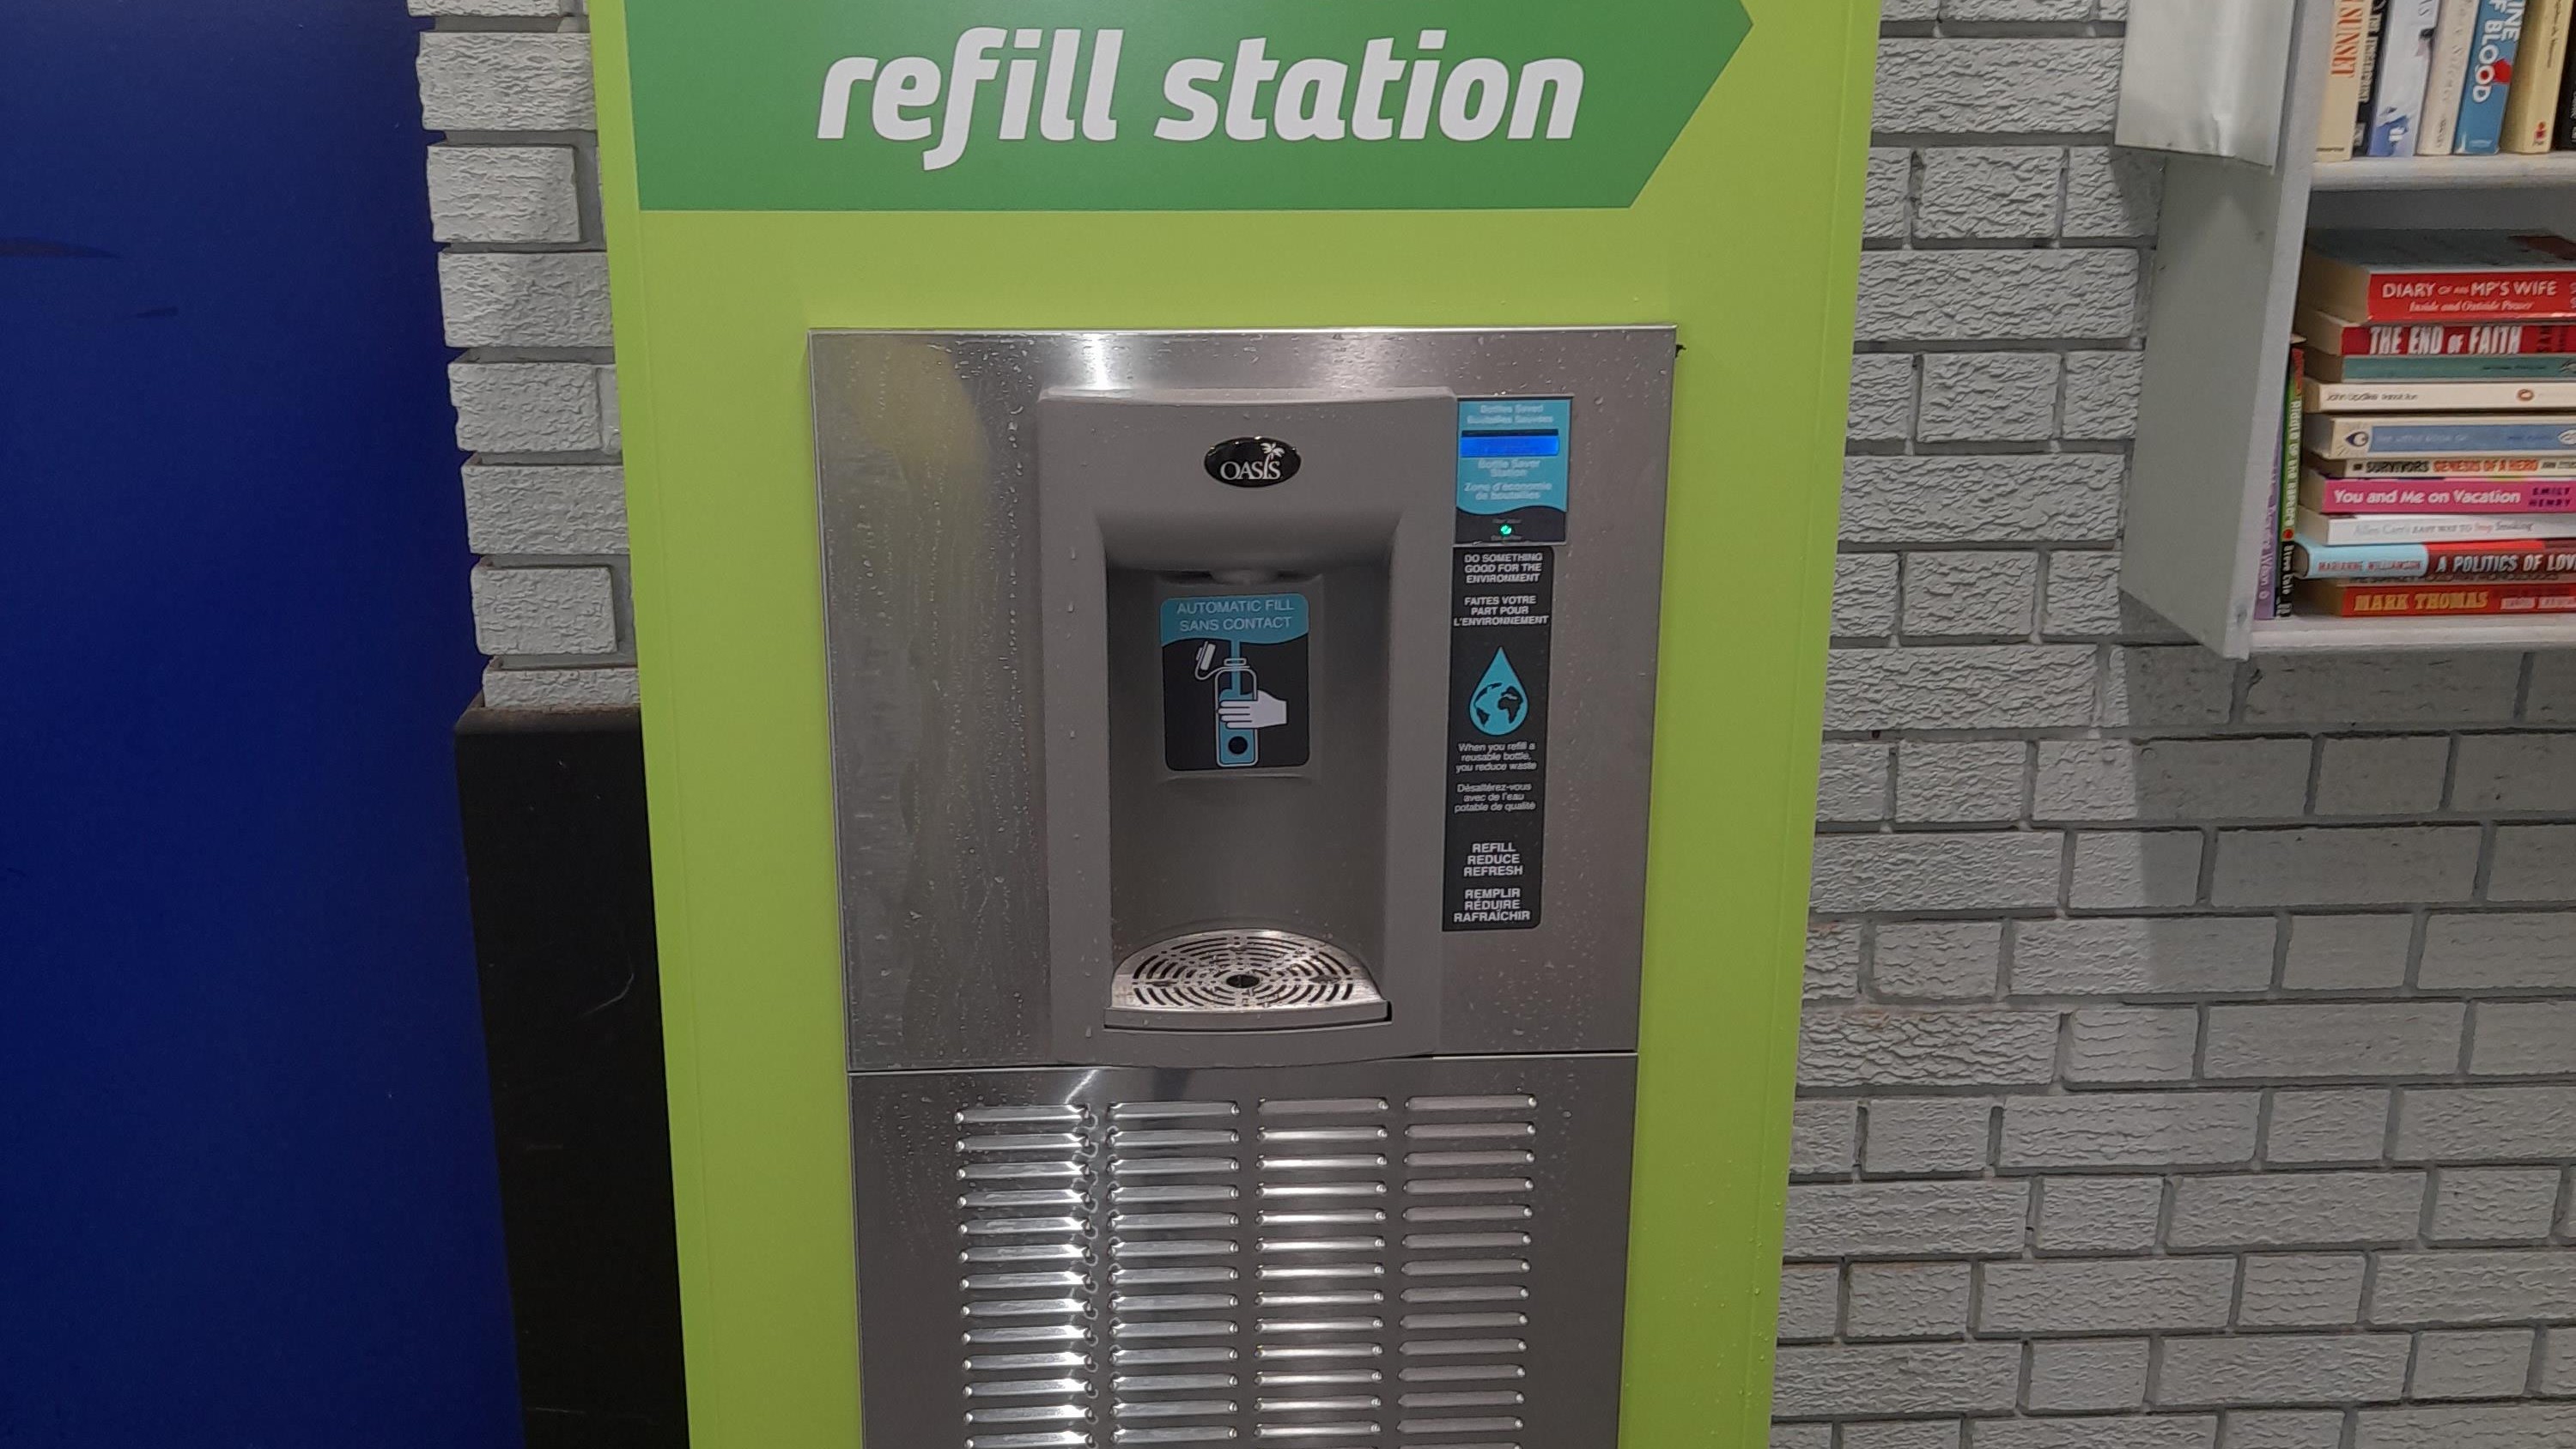 A water dispenser at Levenshulme station